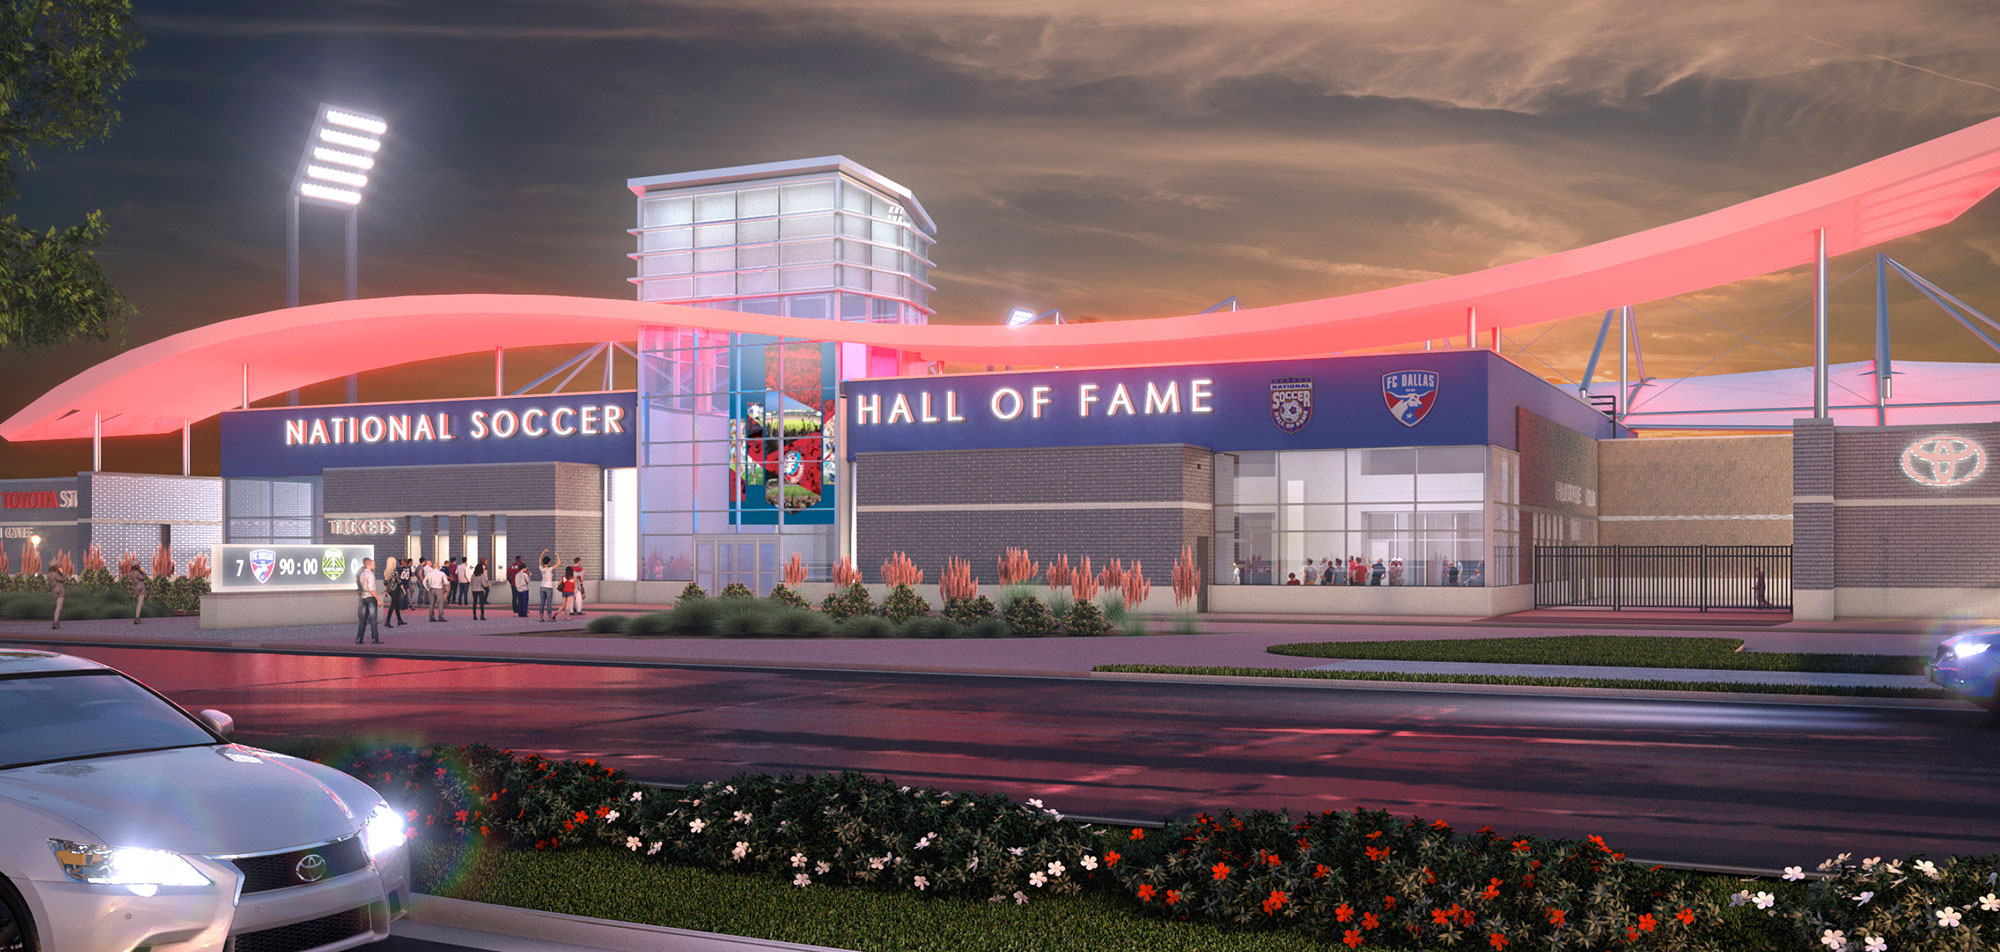 The National Soccer Hall of Fame is located at Frisco's Toyota Stadium